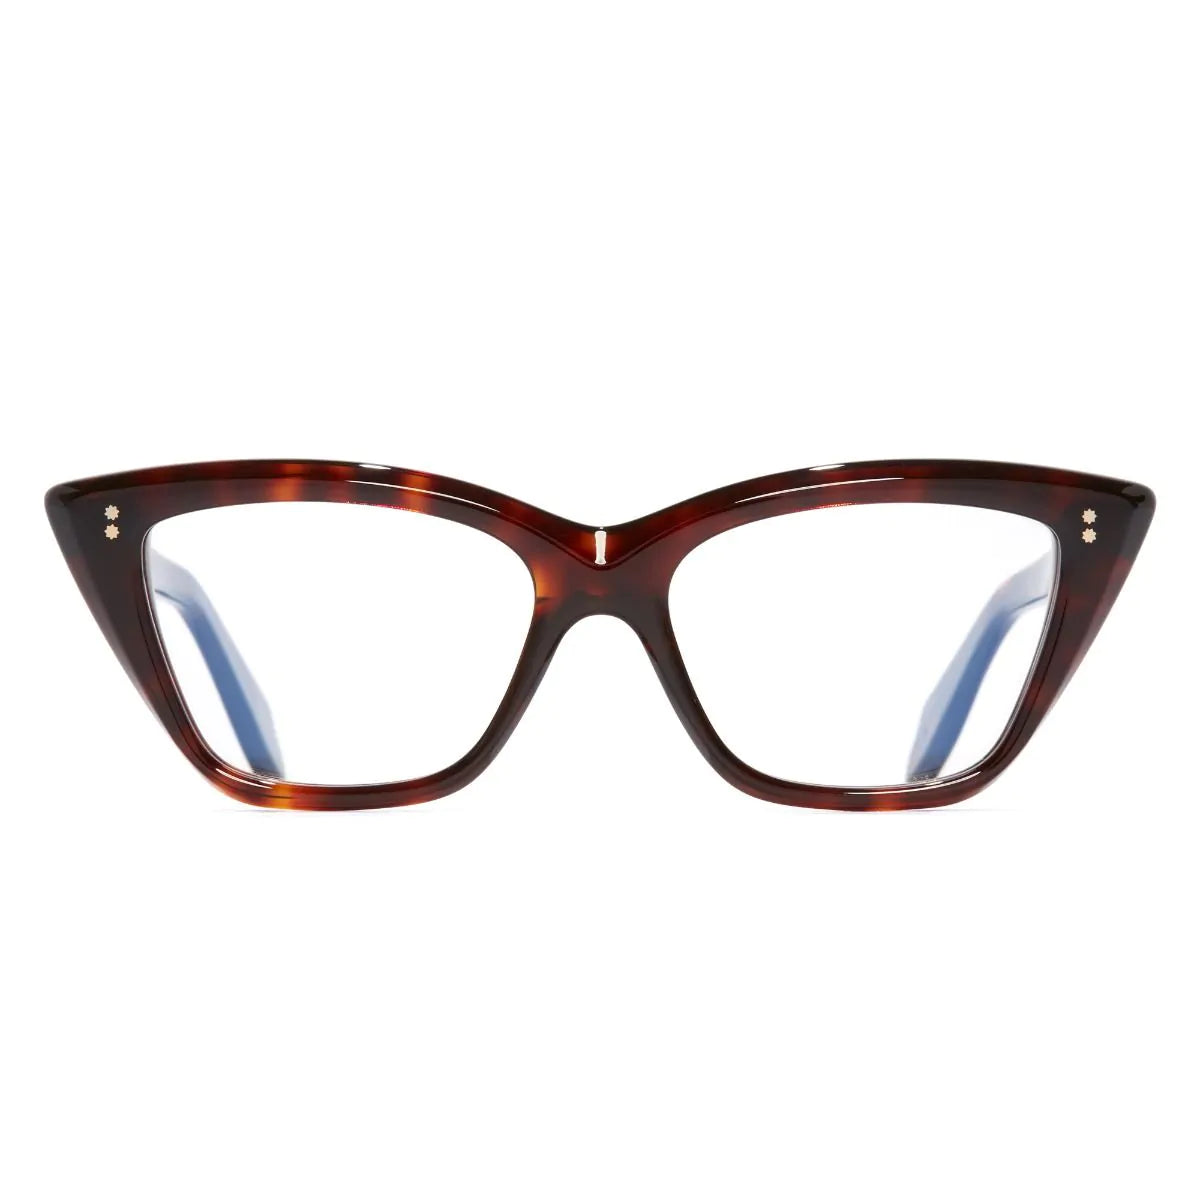 9241 Cat Eye Optical Glasses - Dark Turtle by Cutler and Gross